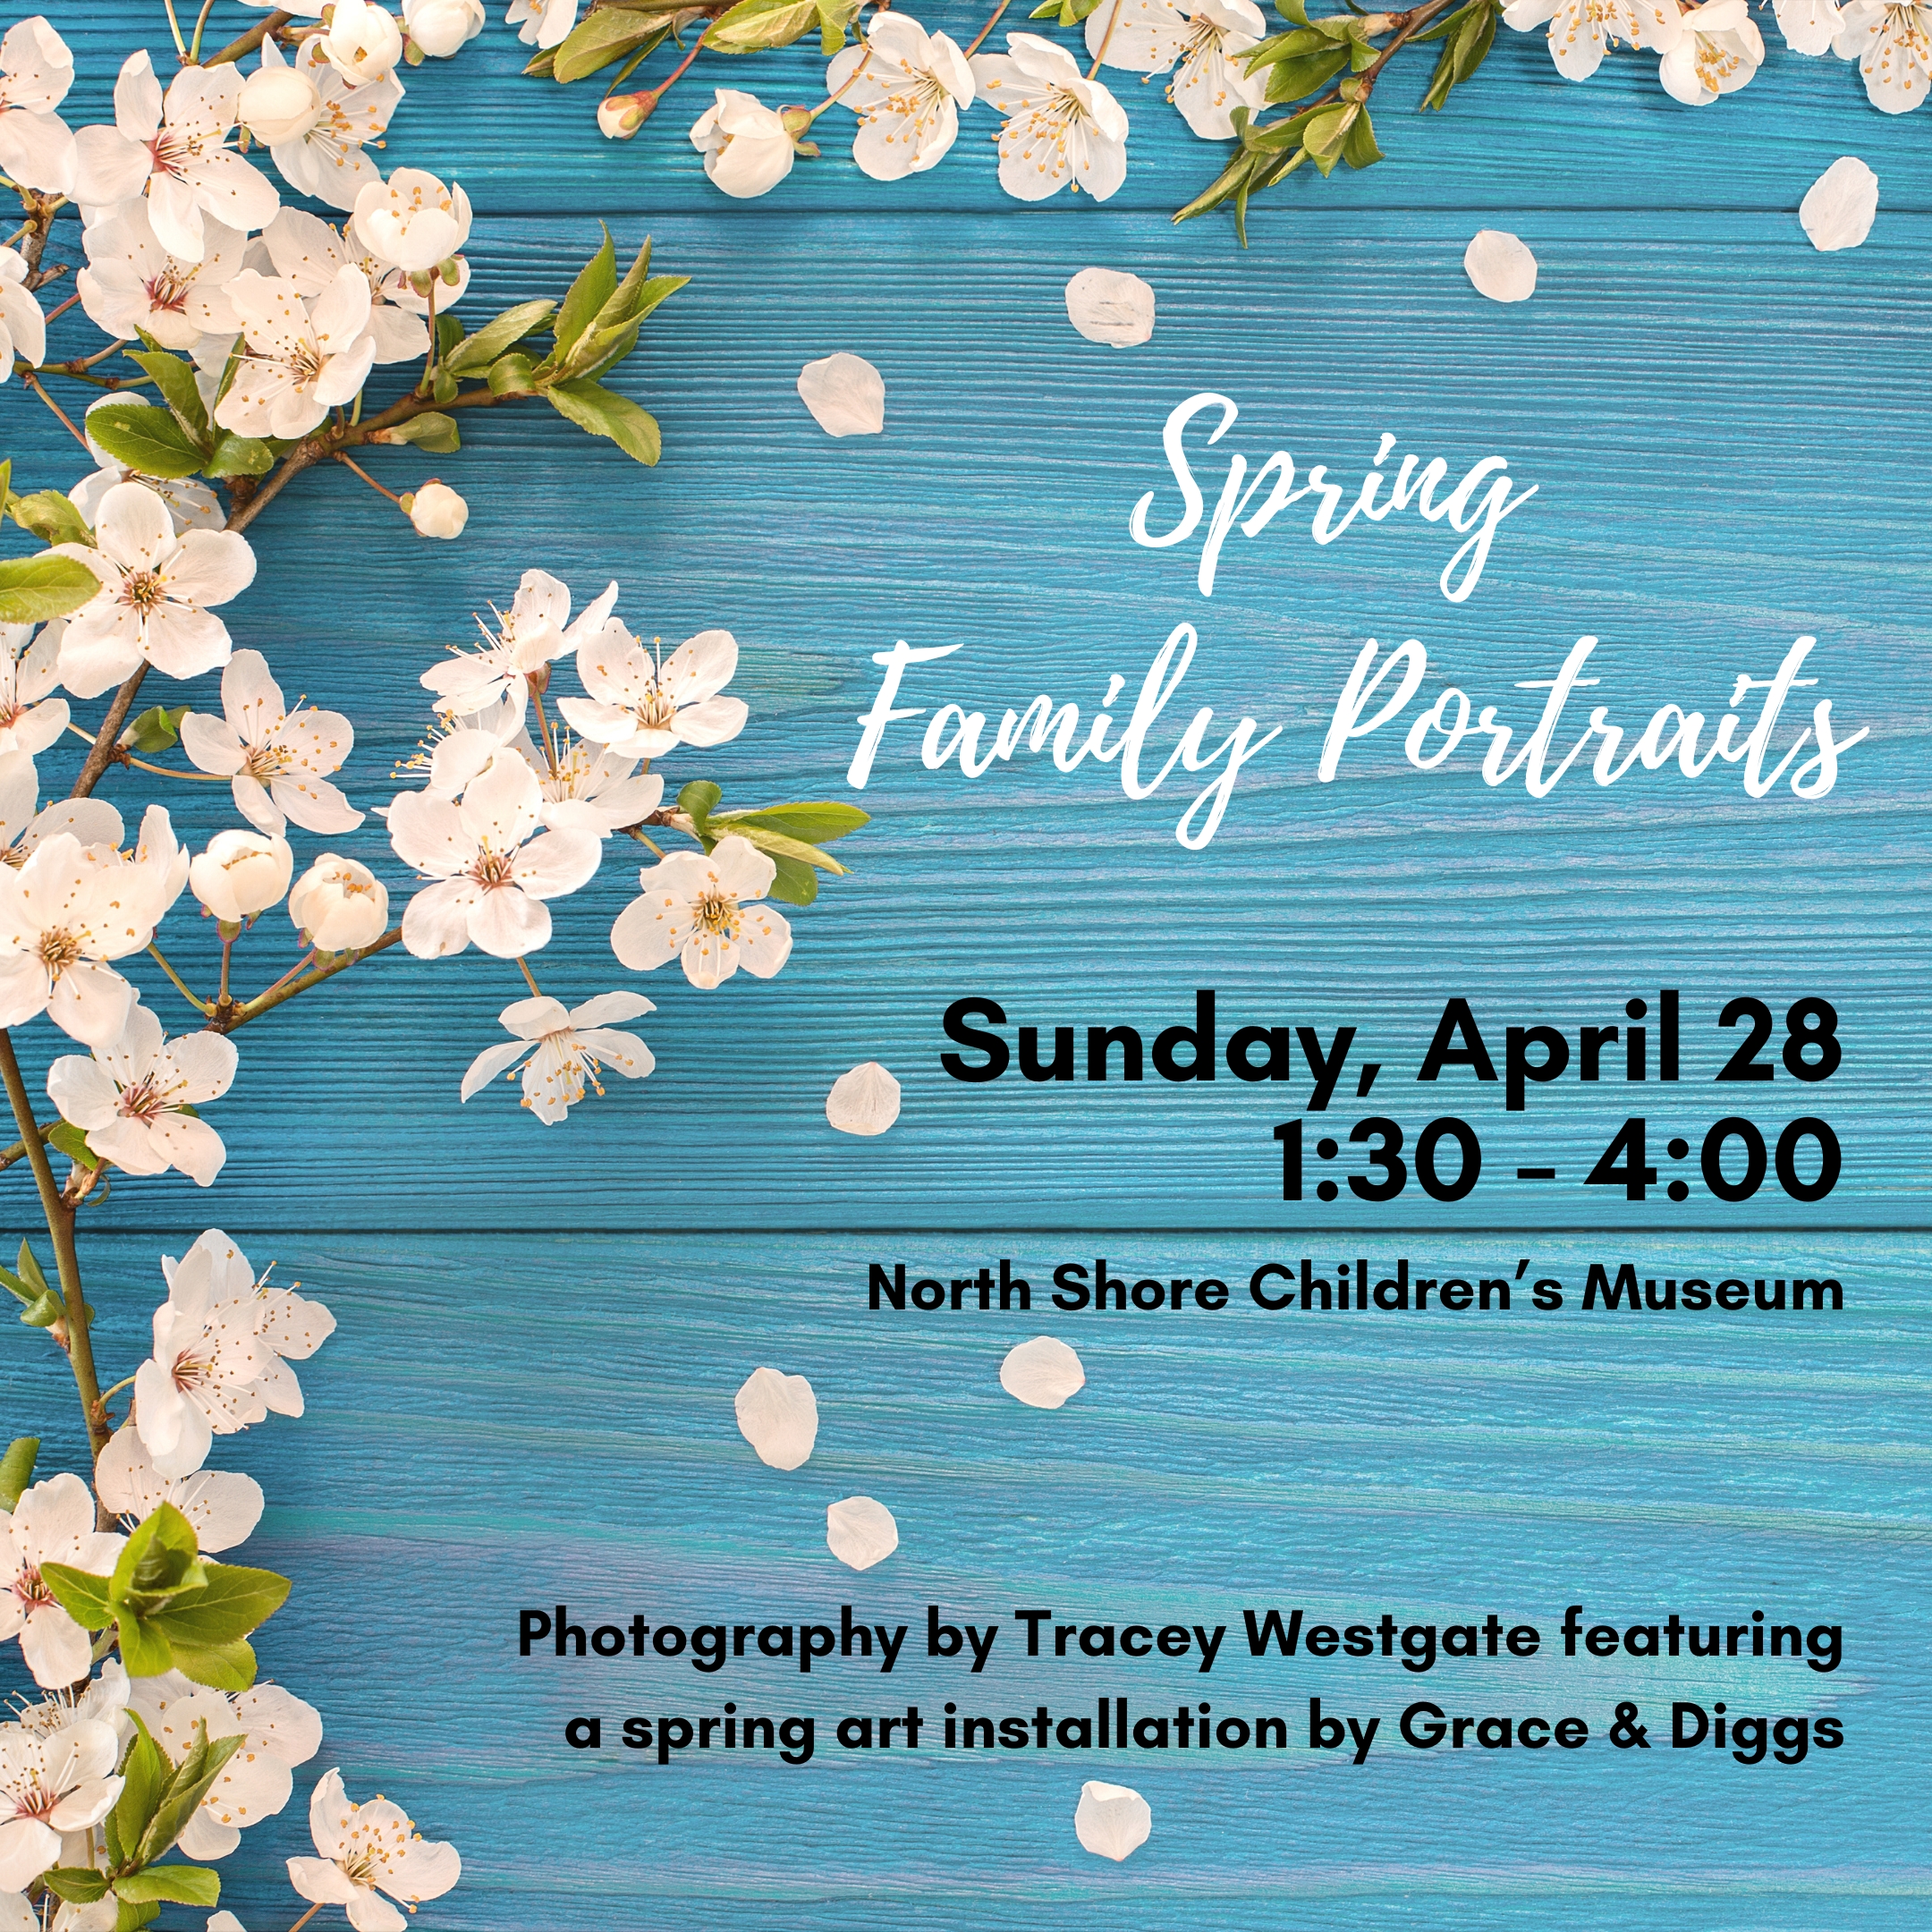 Family portraits in spring" event details against a blue wooden backdrop decorated with white cherry blossoms.